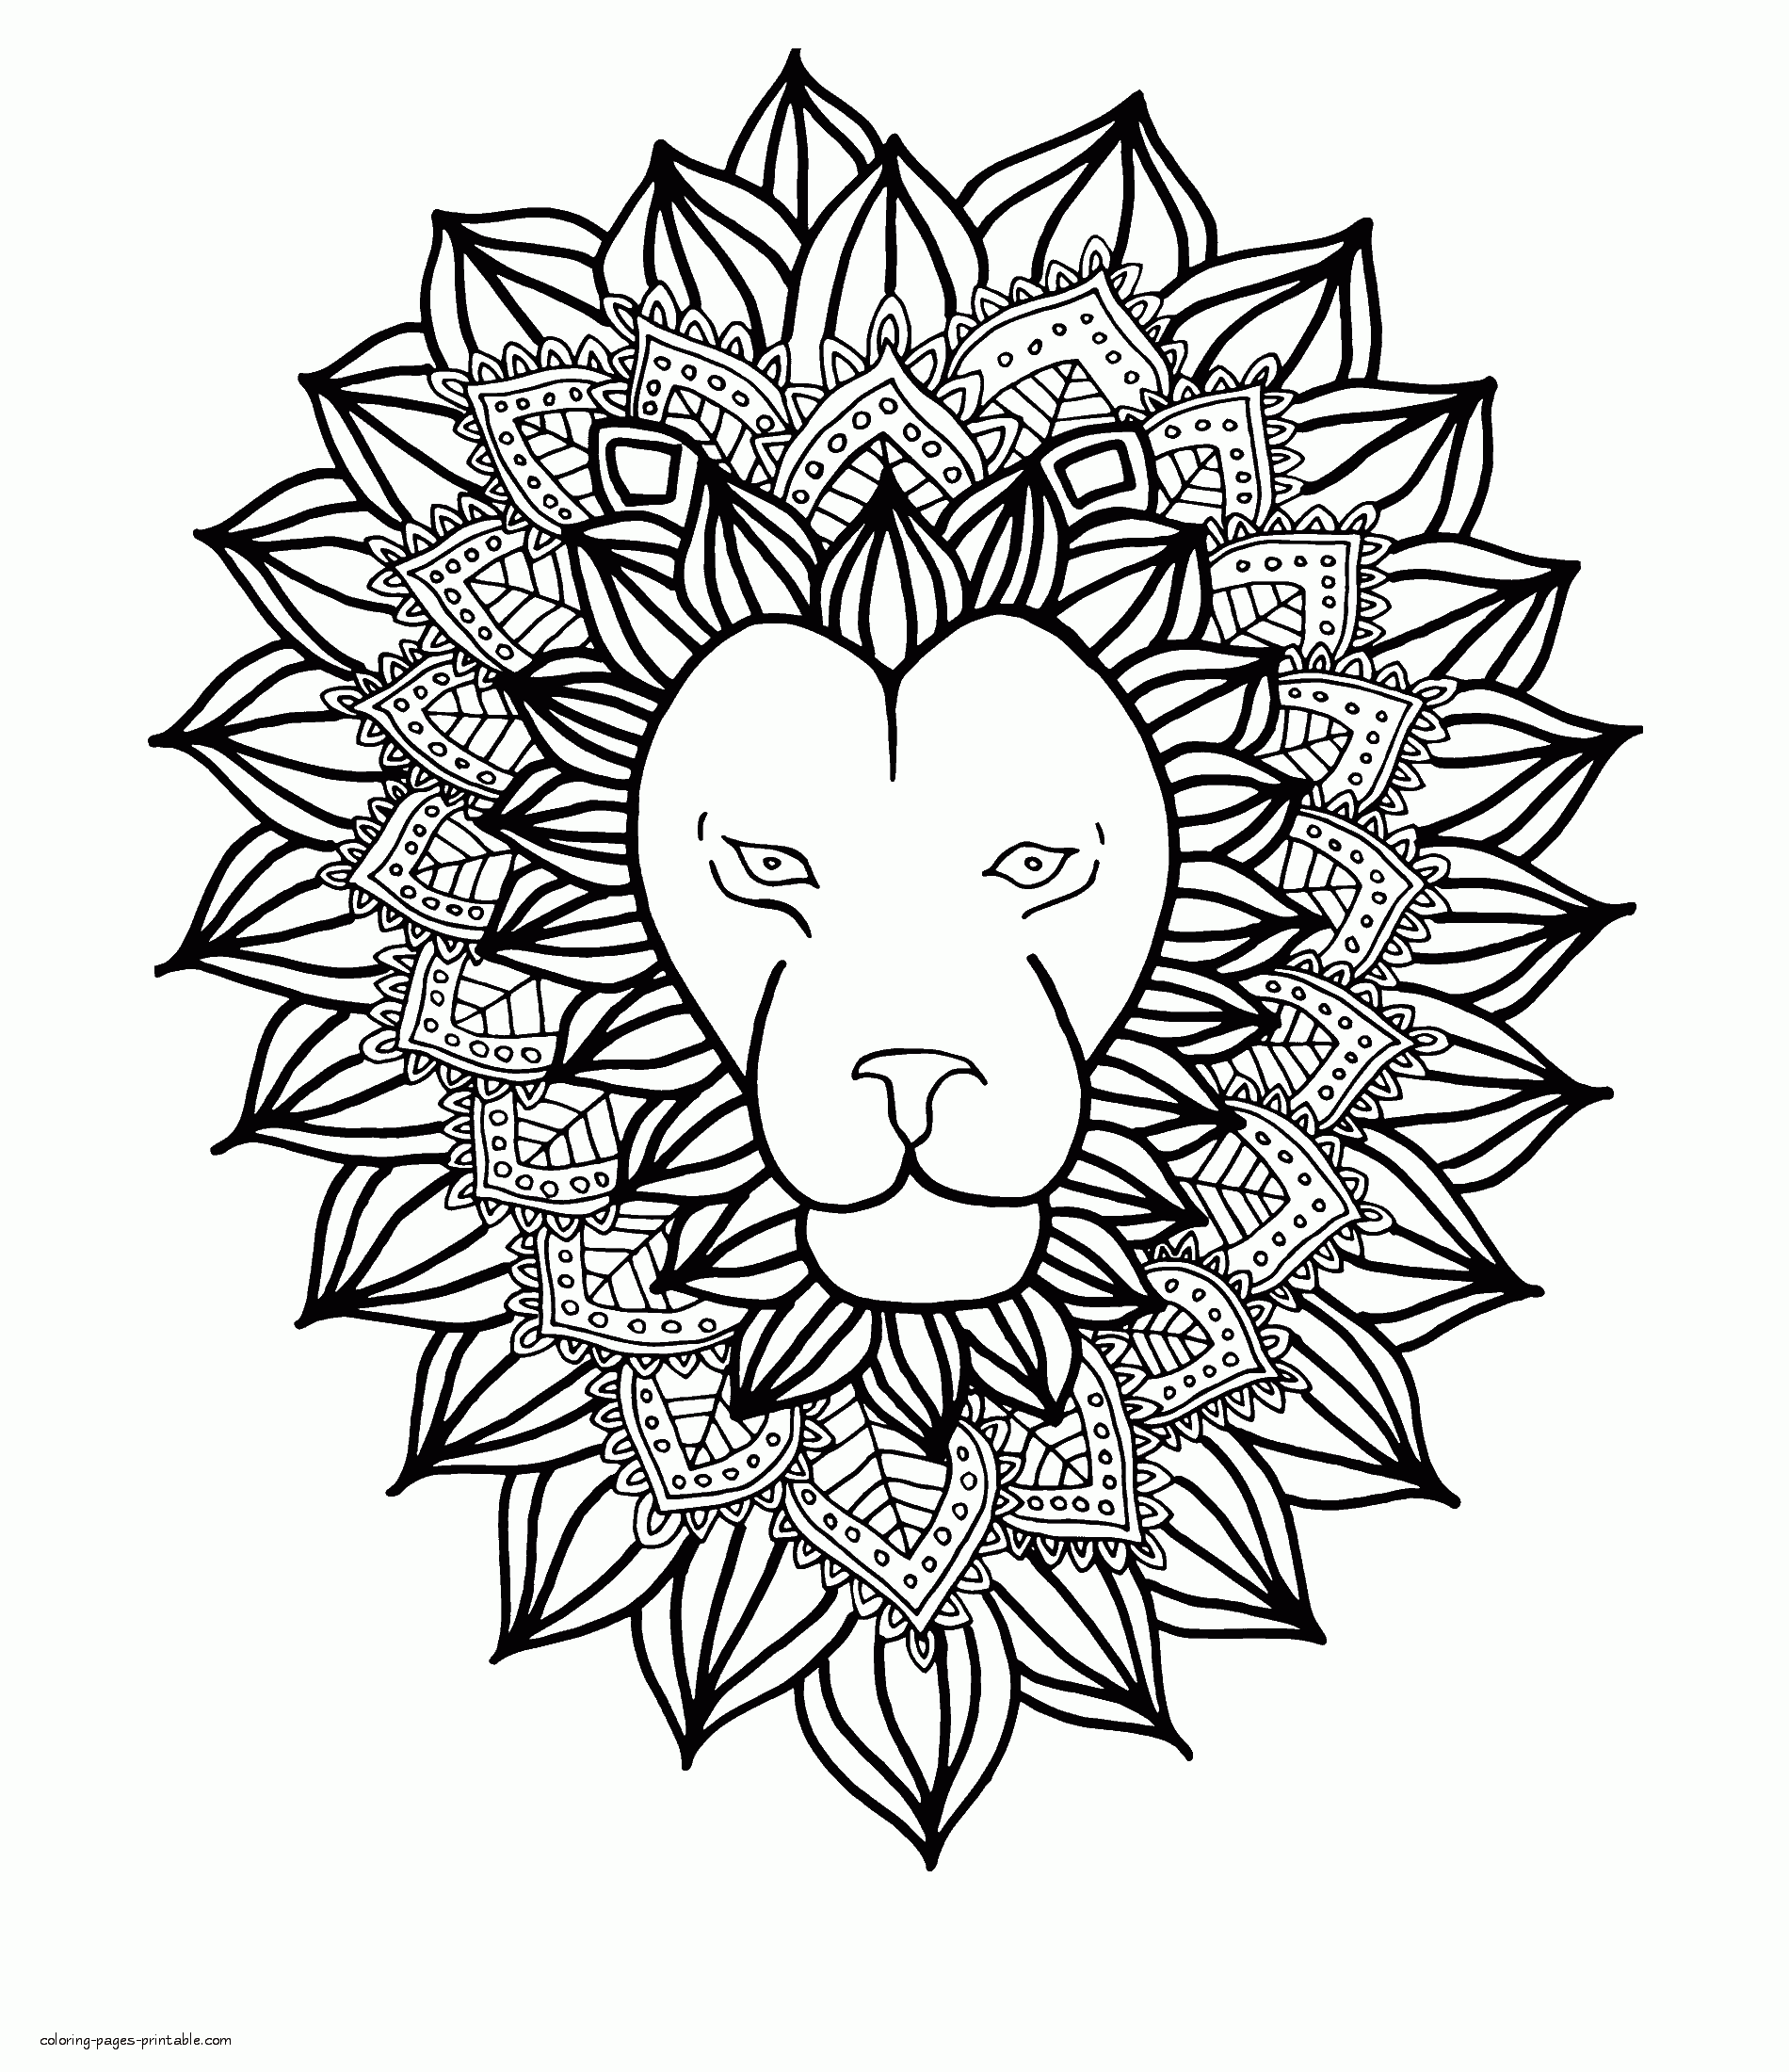 Free Lion Coloring Pages For Adults